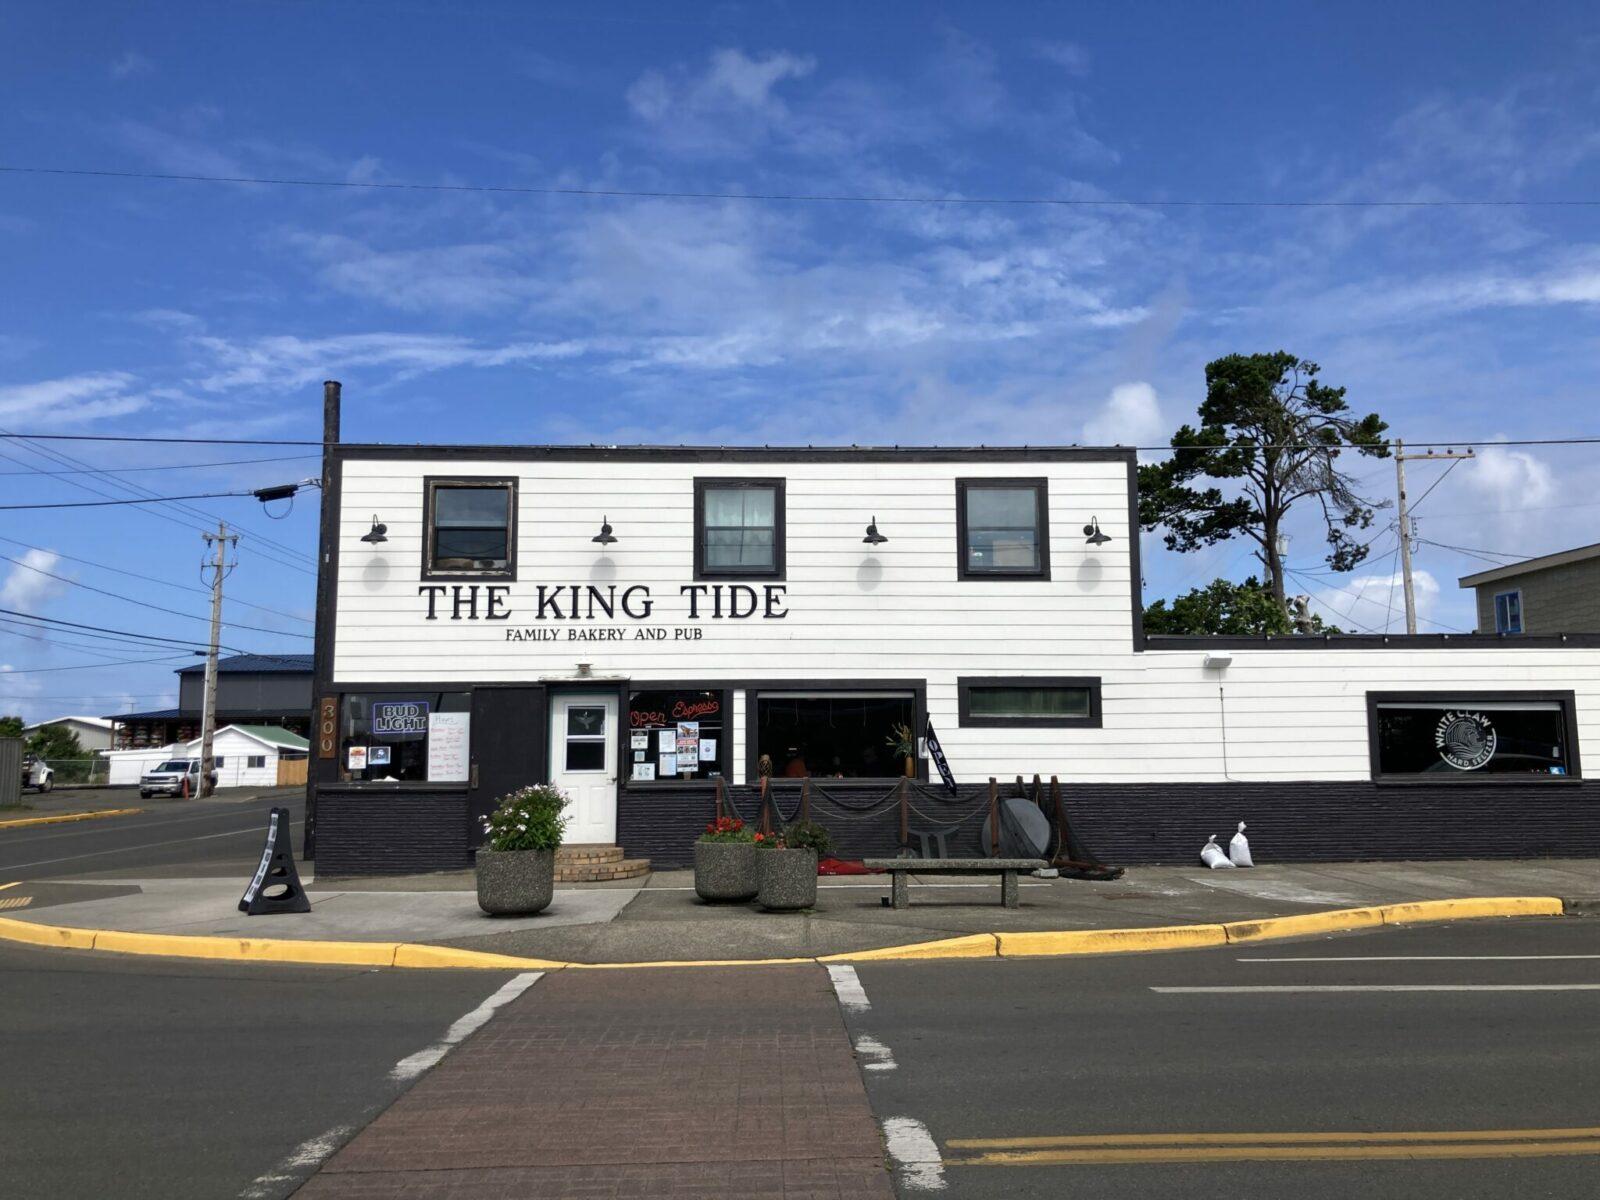 A white painted wooden building with black trim on a street corner. The sign says King Tide Family bakery and pub